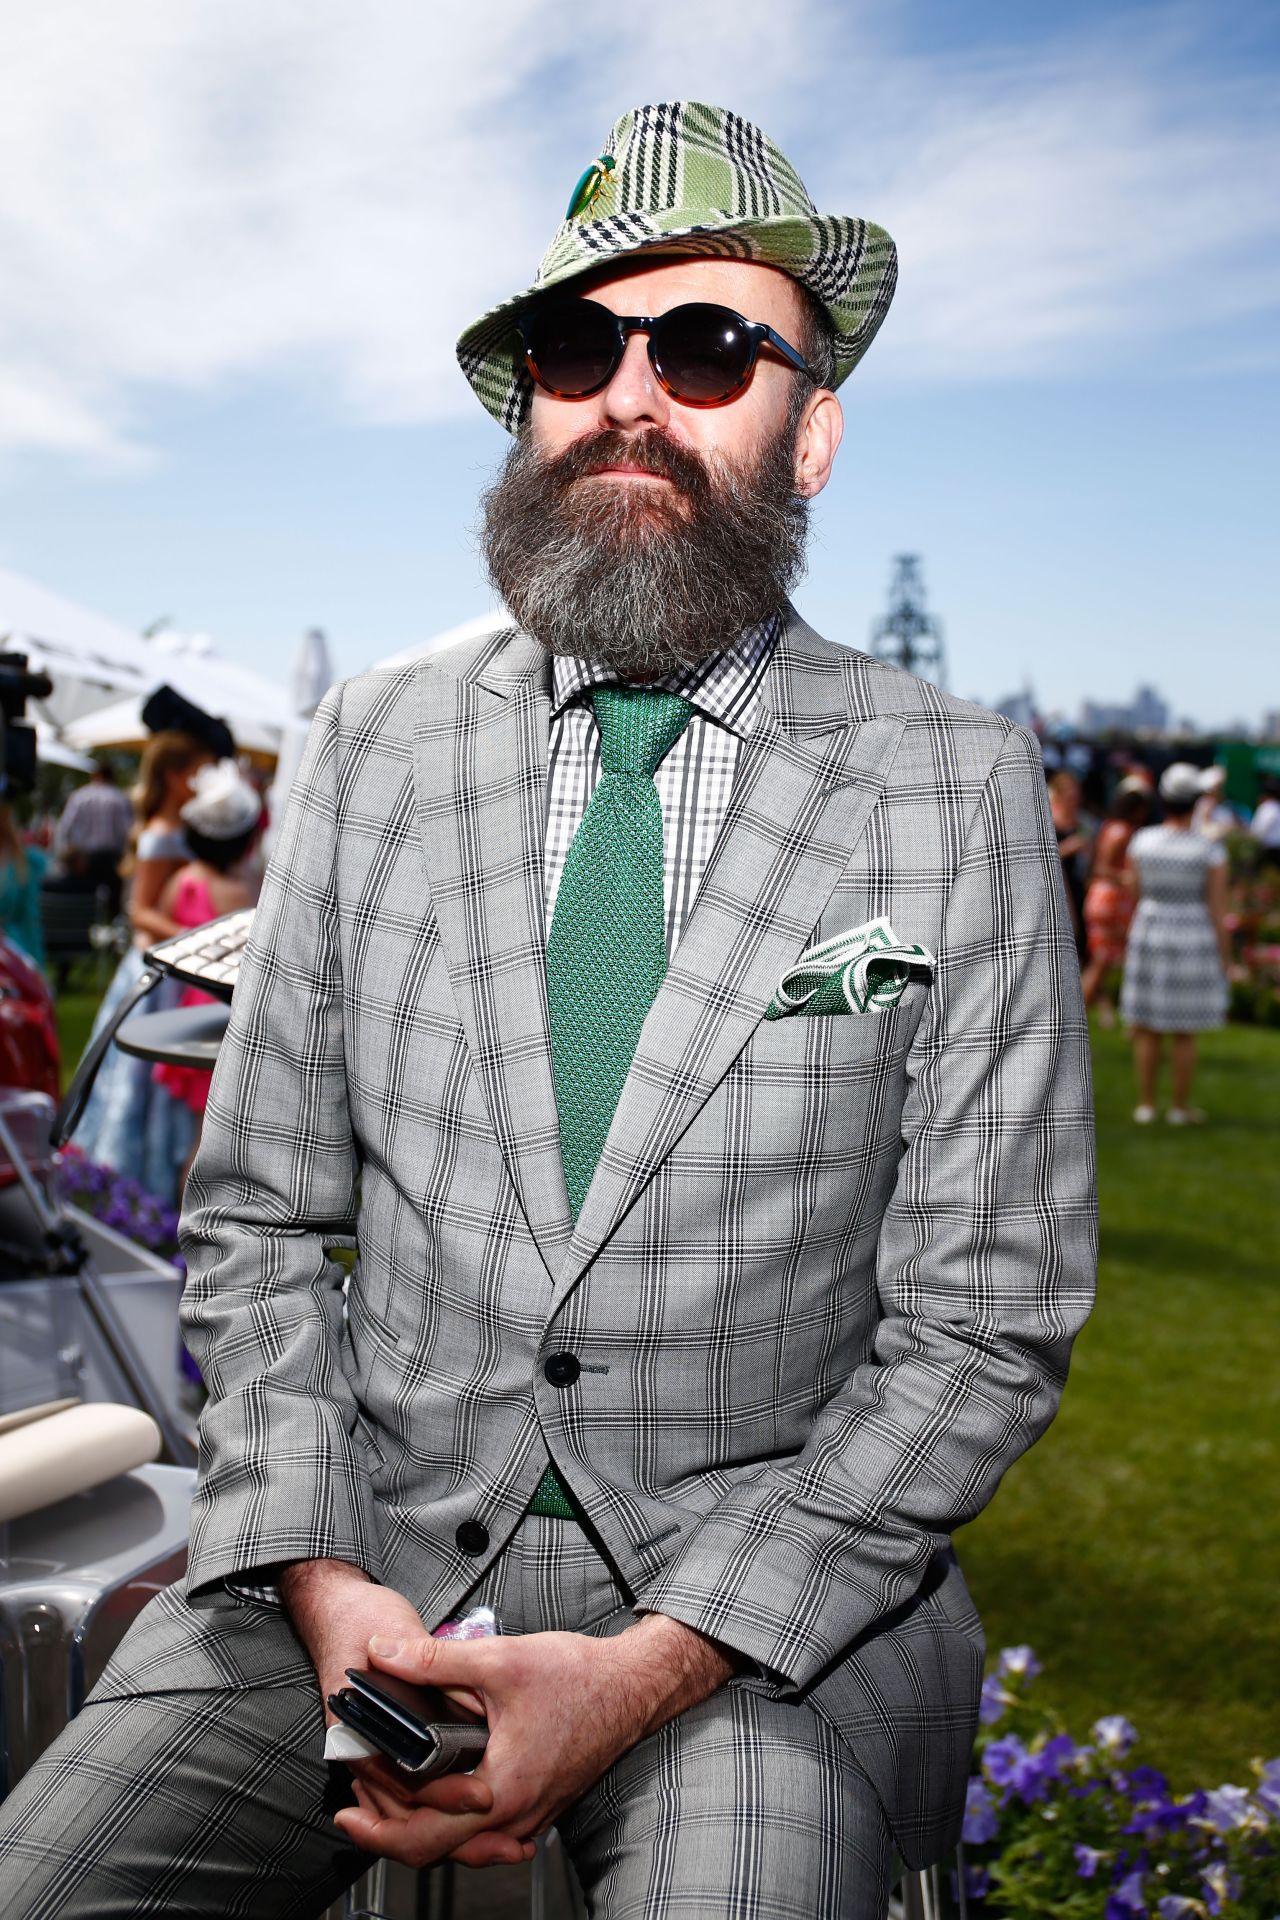 Of course, hats aren't just for women. Here designer Phillip Rhodes poses on Melbourne Cup Day at Flemington Racecourse on November 3, 2015 in Melbourne, Australia.